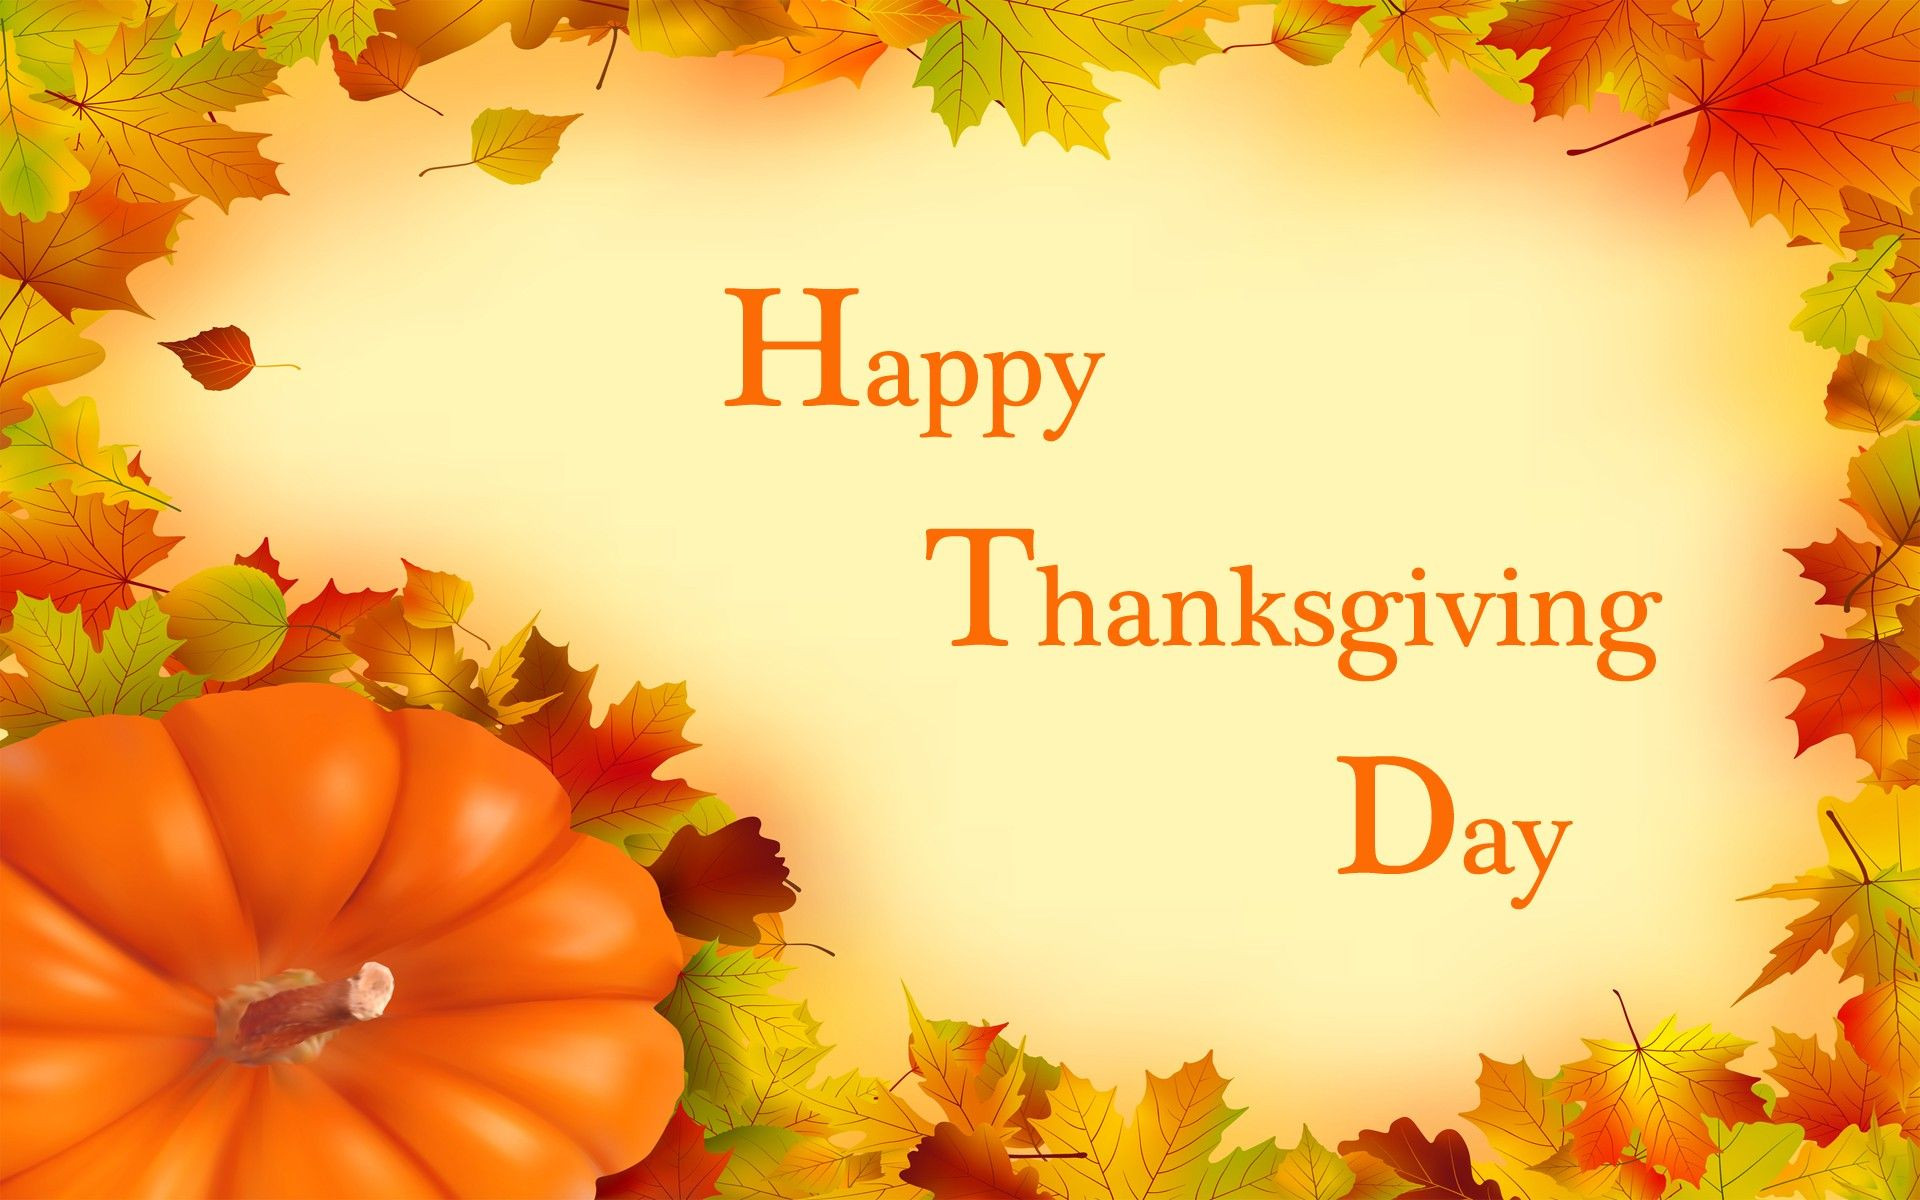 Thanksgiving Quotes Wallpaper
 Happy Thanksgiving Day Wallpapers & 2017